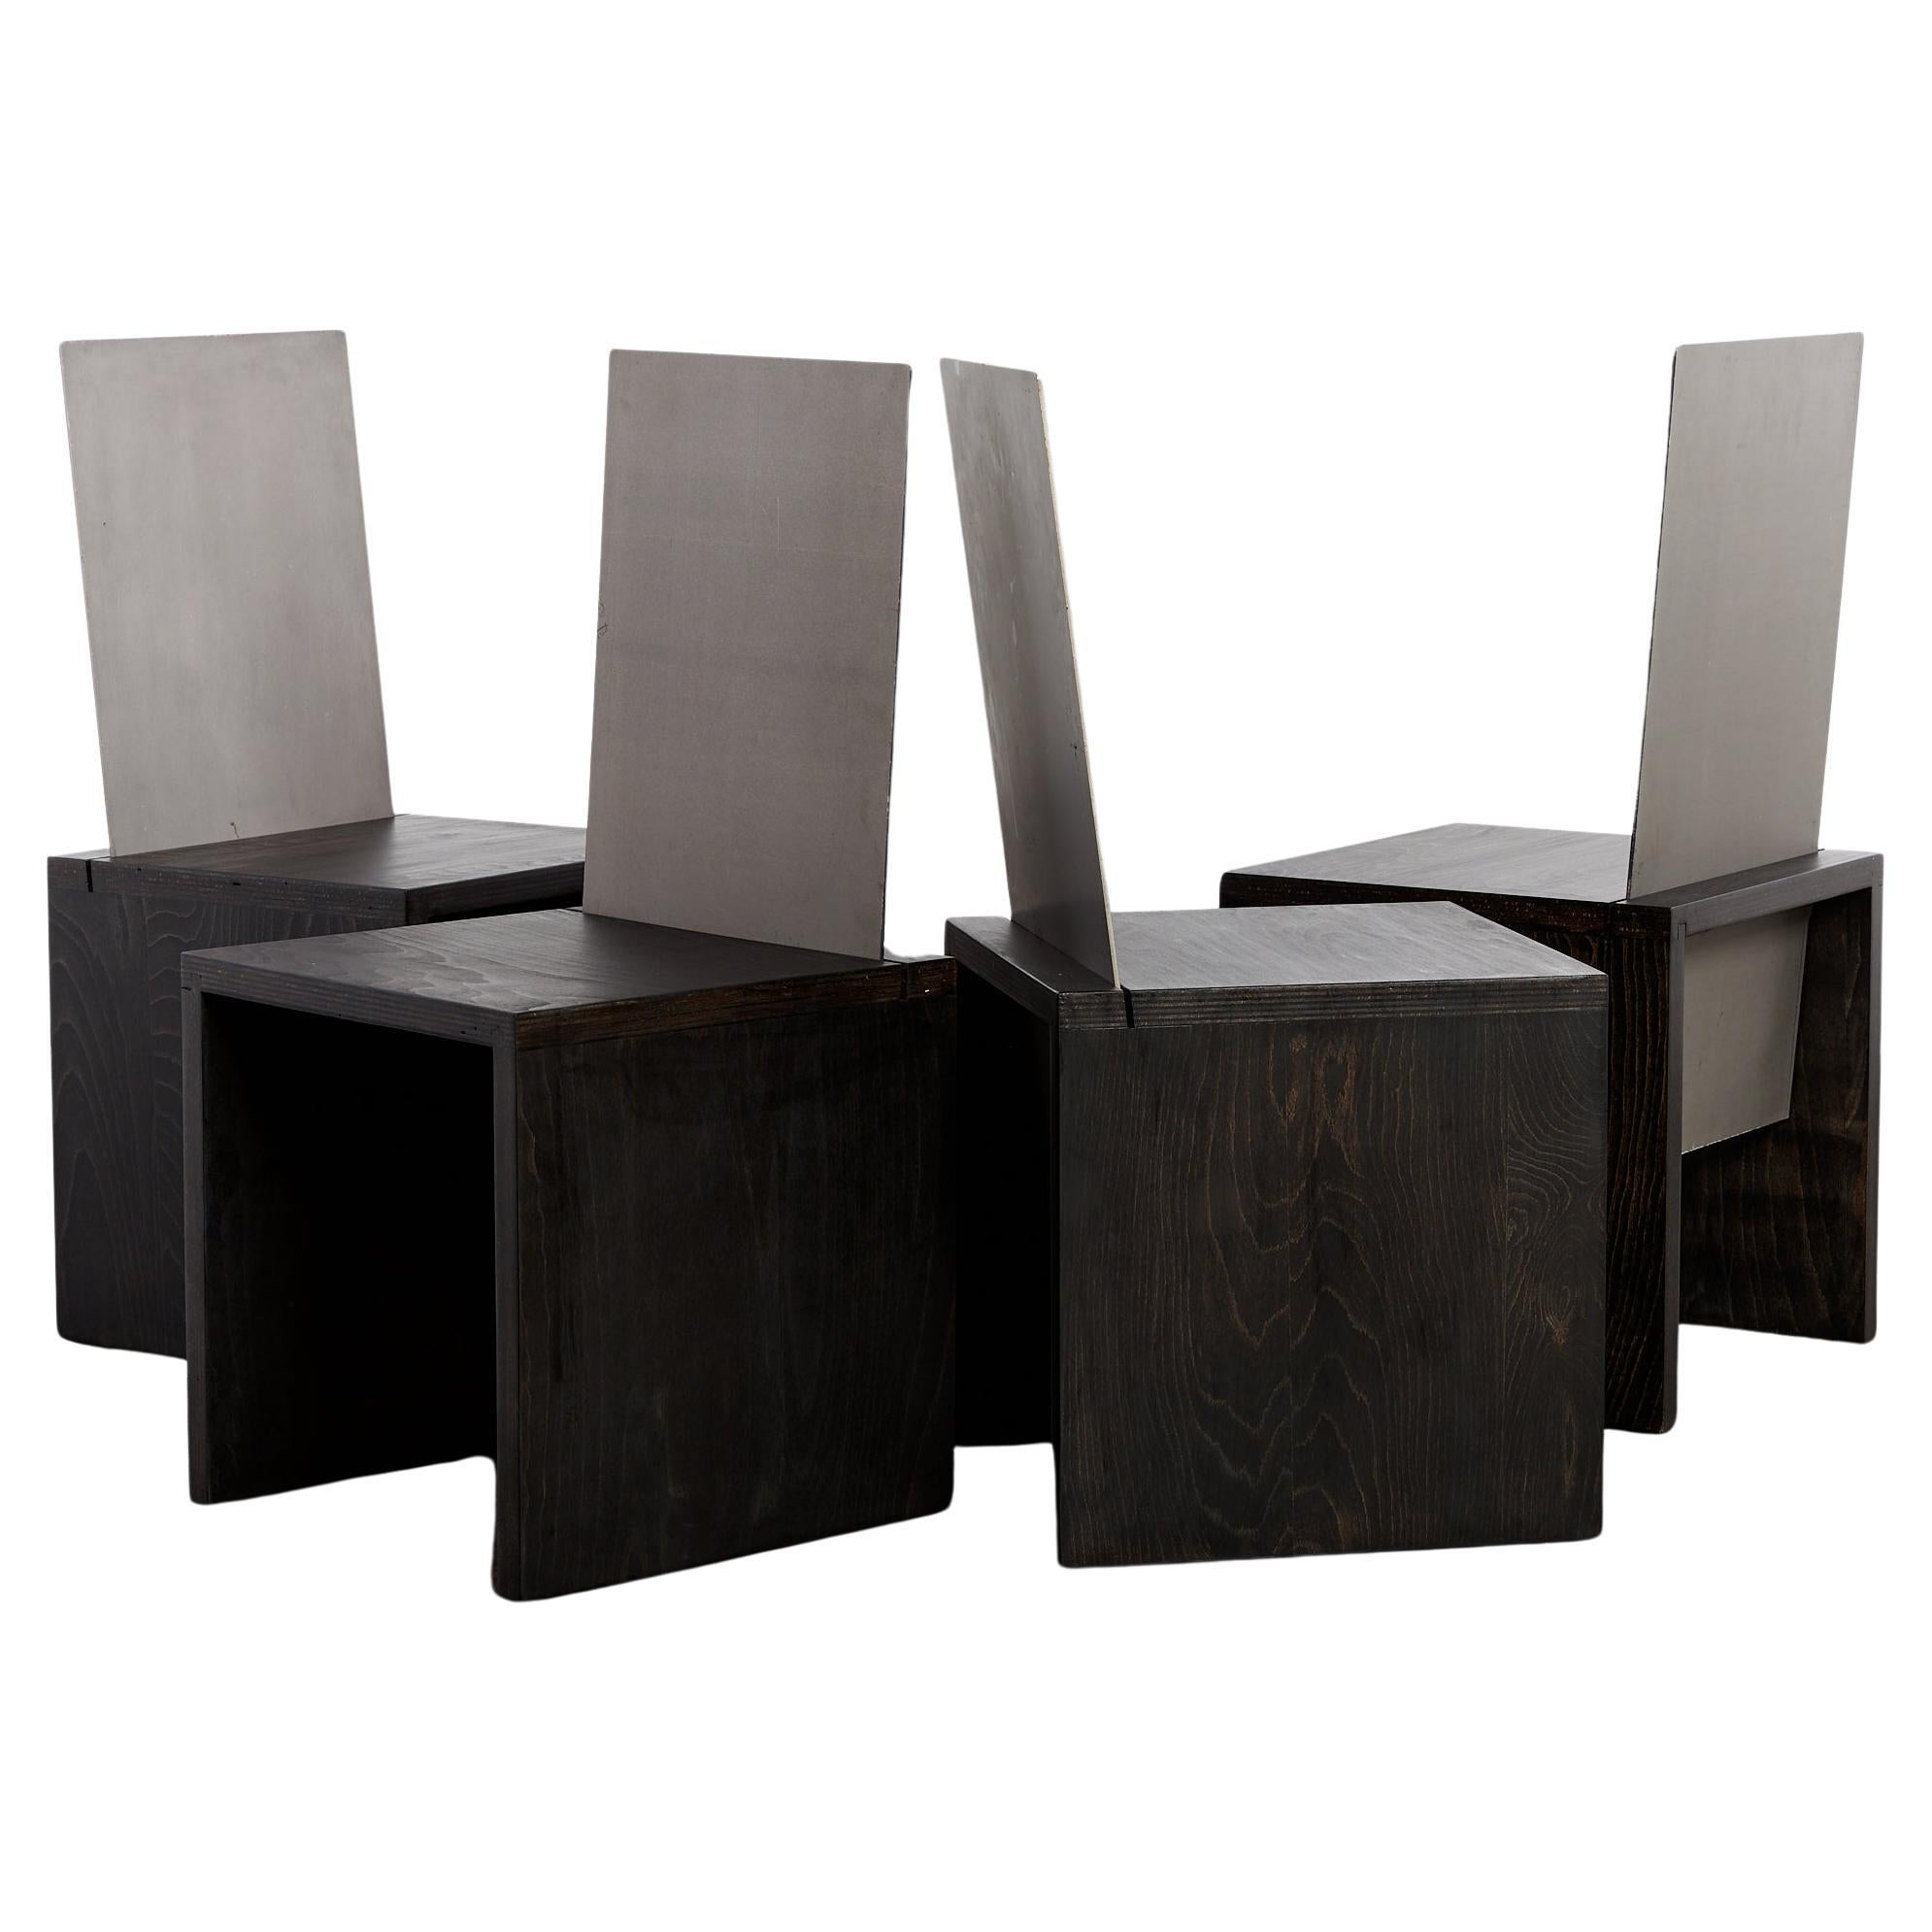 Set of 4 postmodern steel and ebonised sculptural cube dining chairs